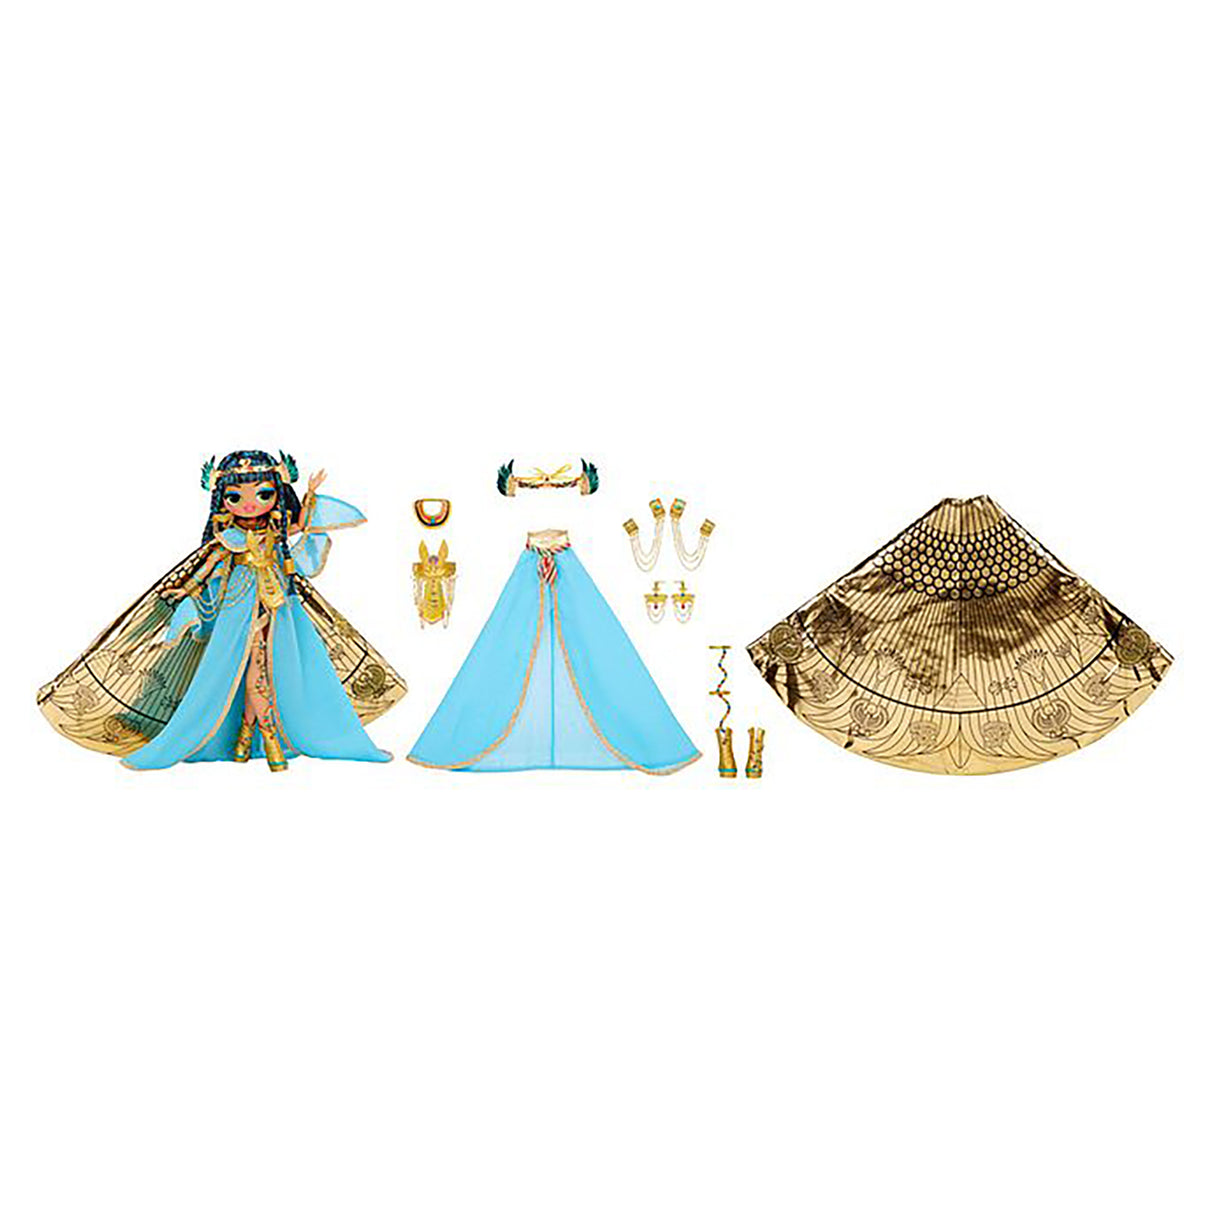 L.O.L. Surprise! O.M.G. Fierce 2022 Collector Edition - Cleopatra